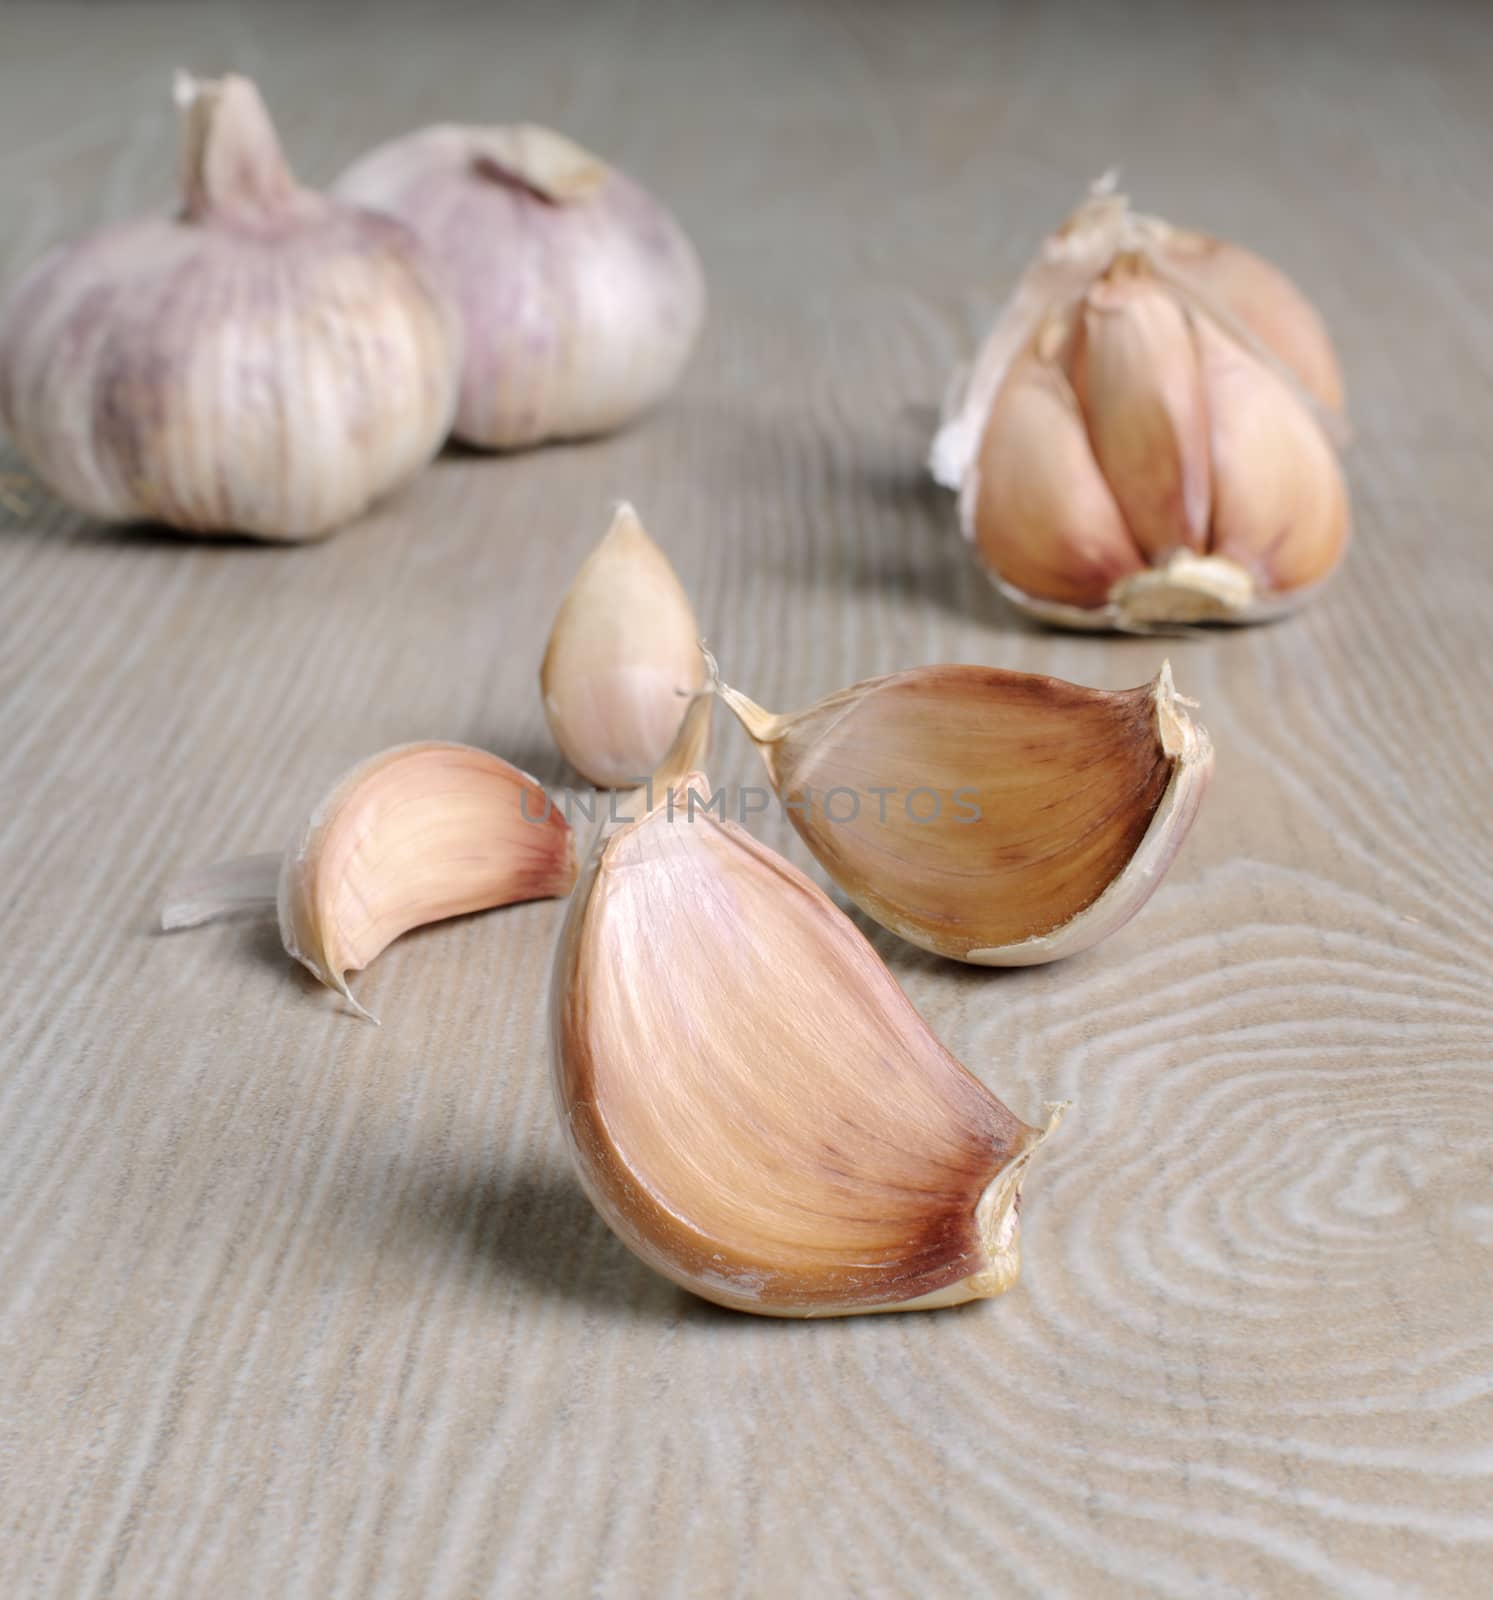 Garlic cloves are a handful on the table